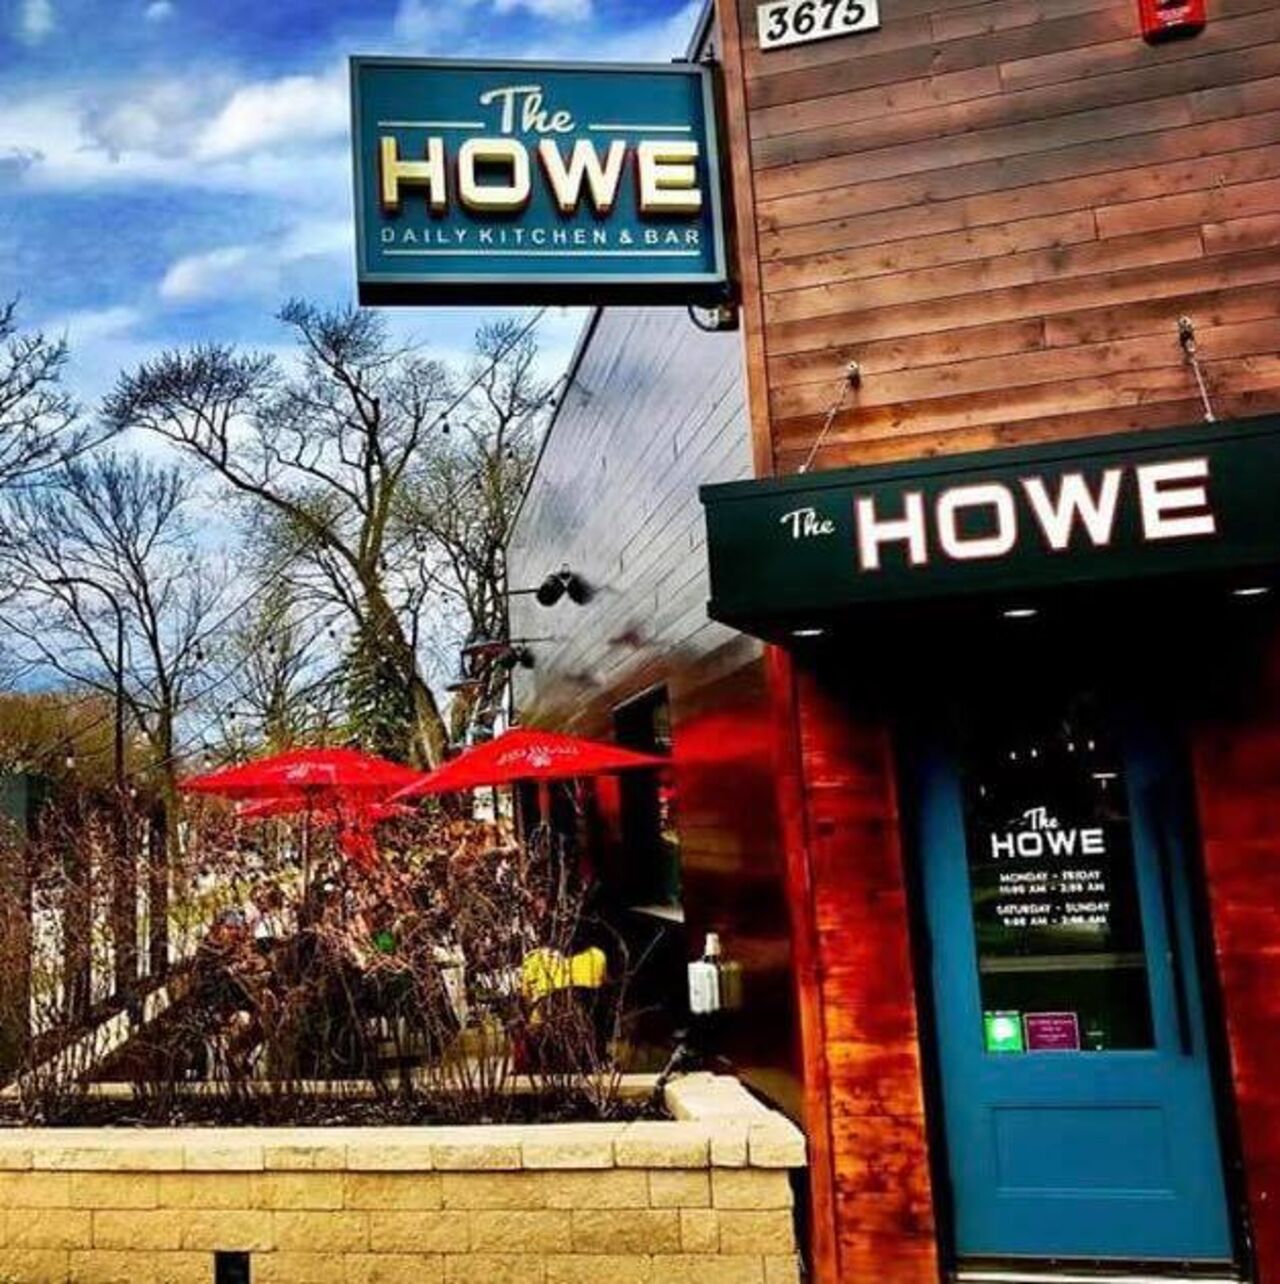 A photo of The Howe